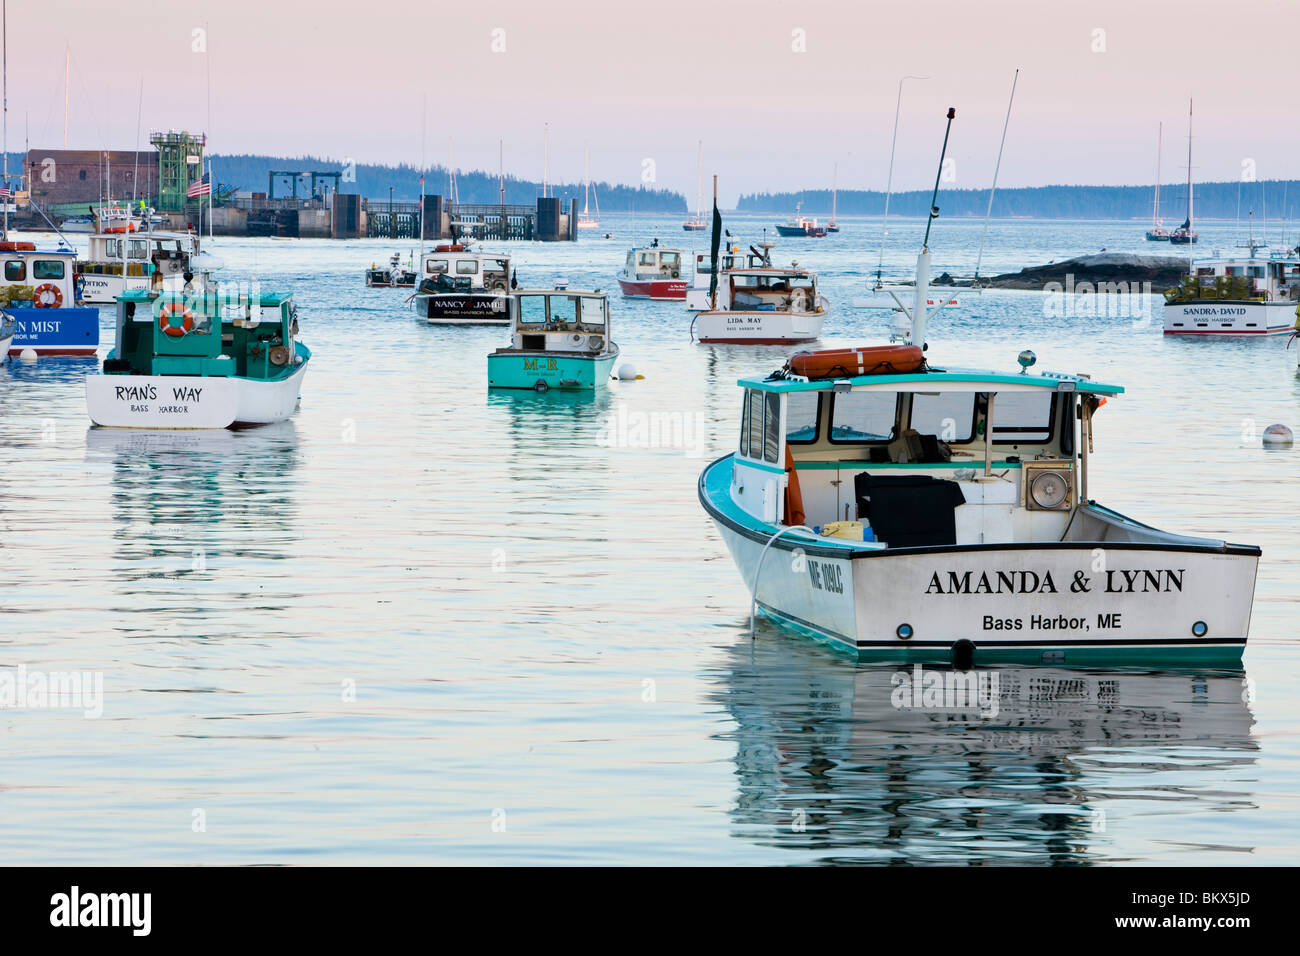 Lobster and fishing boats in the harbor in Bernard, Maine. Stock Photo